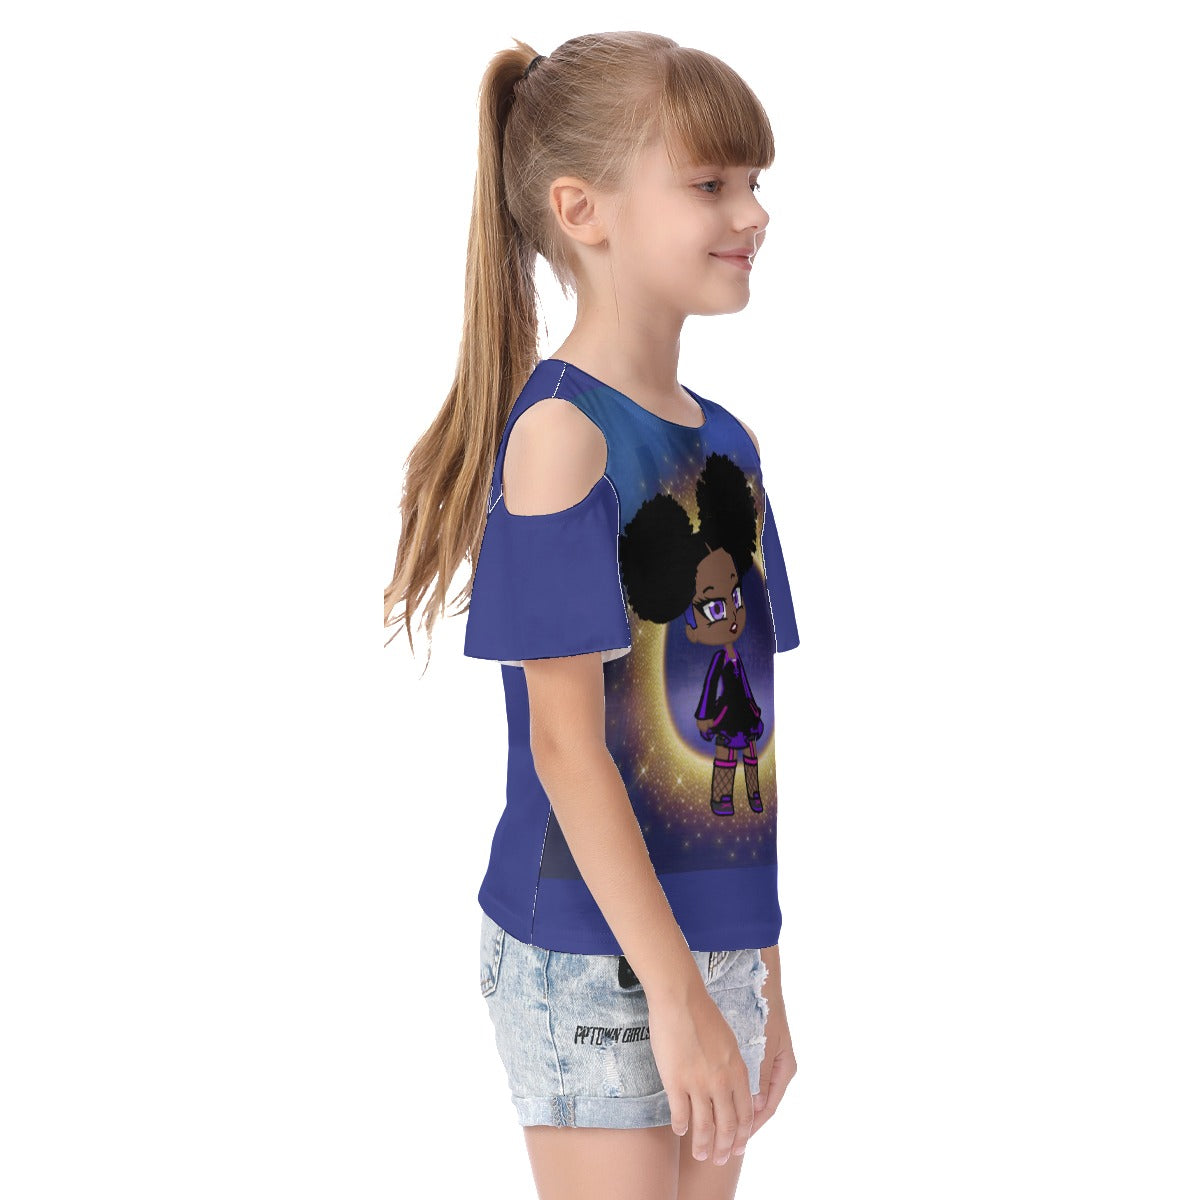 - Fro-Puff Girl's Cold Shoulder T-shirt With Ruffle Sleeves - girls top at TFC&H Co.